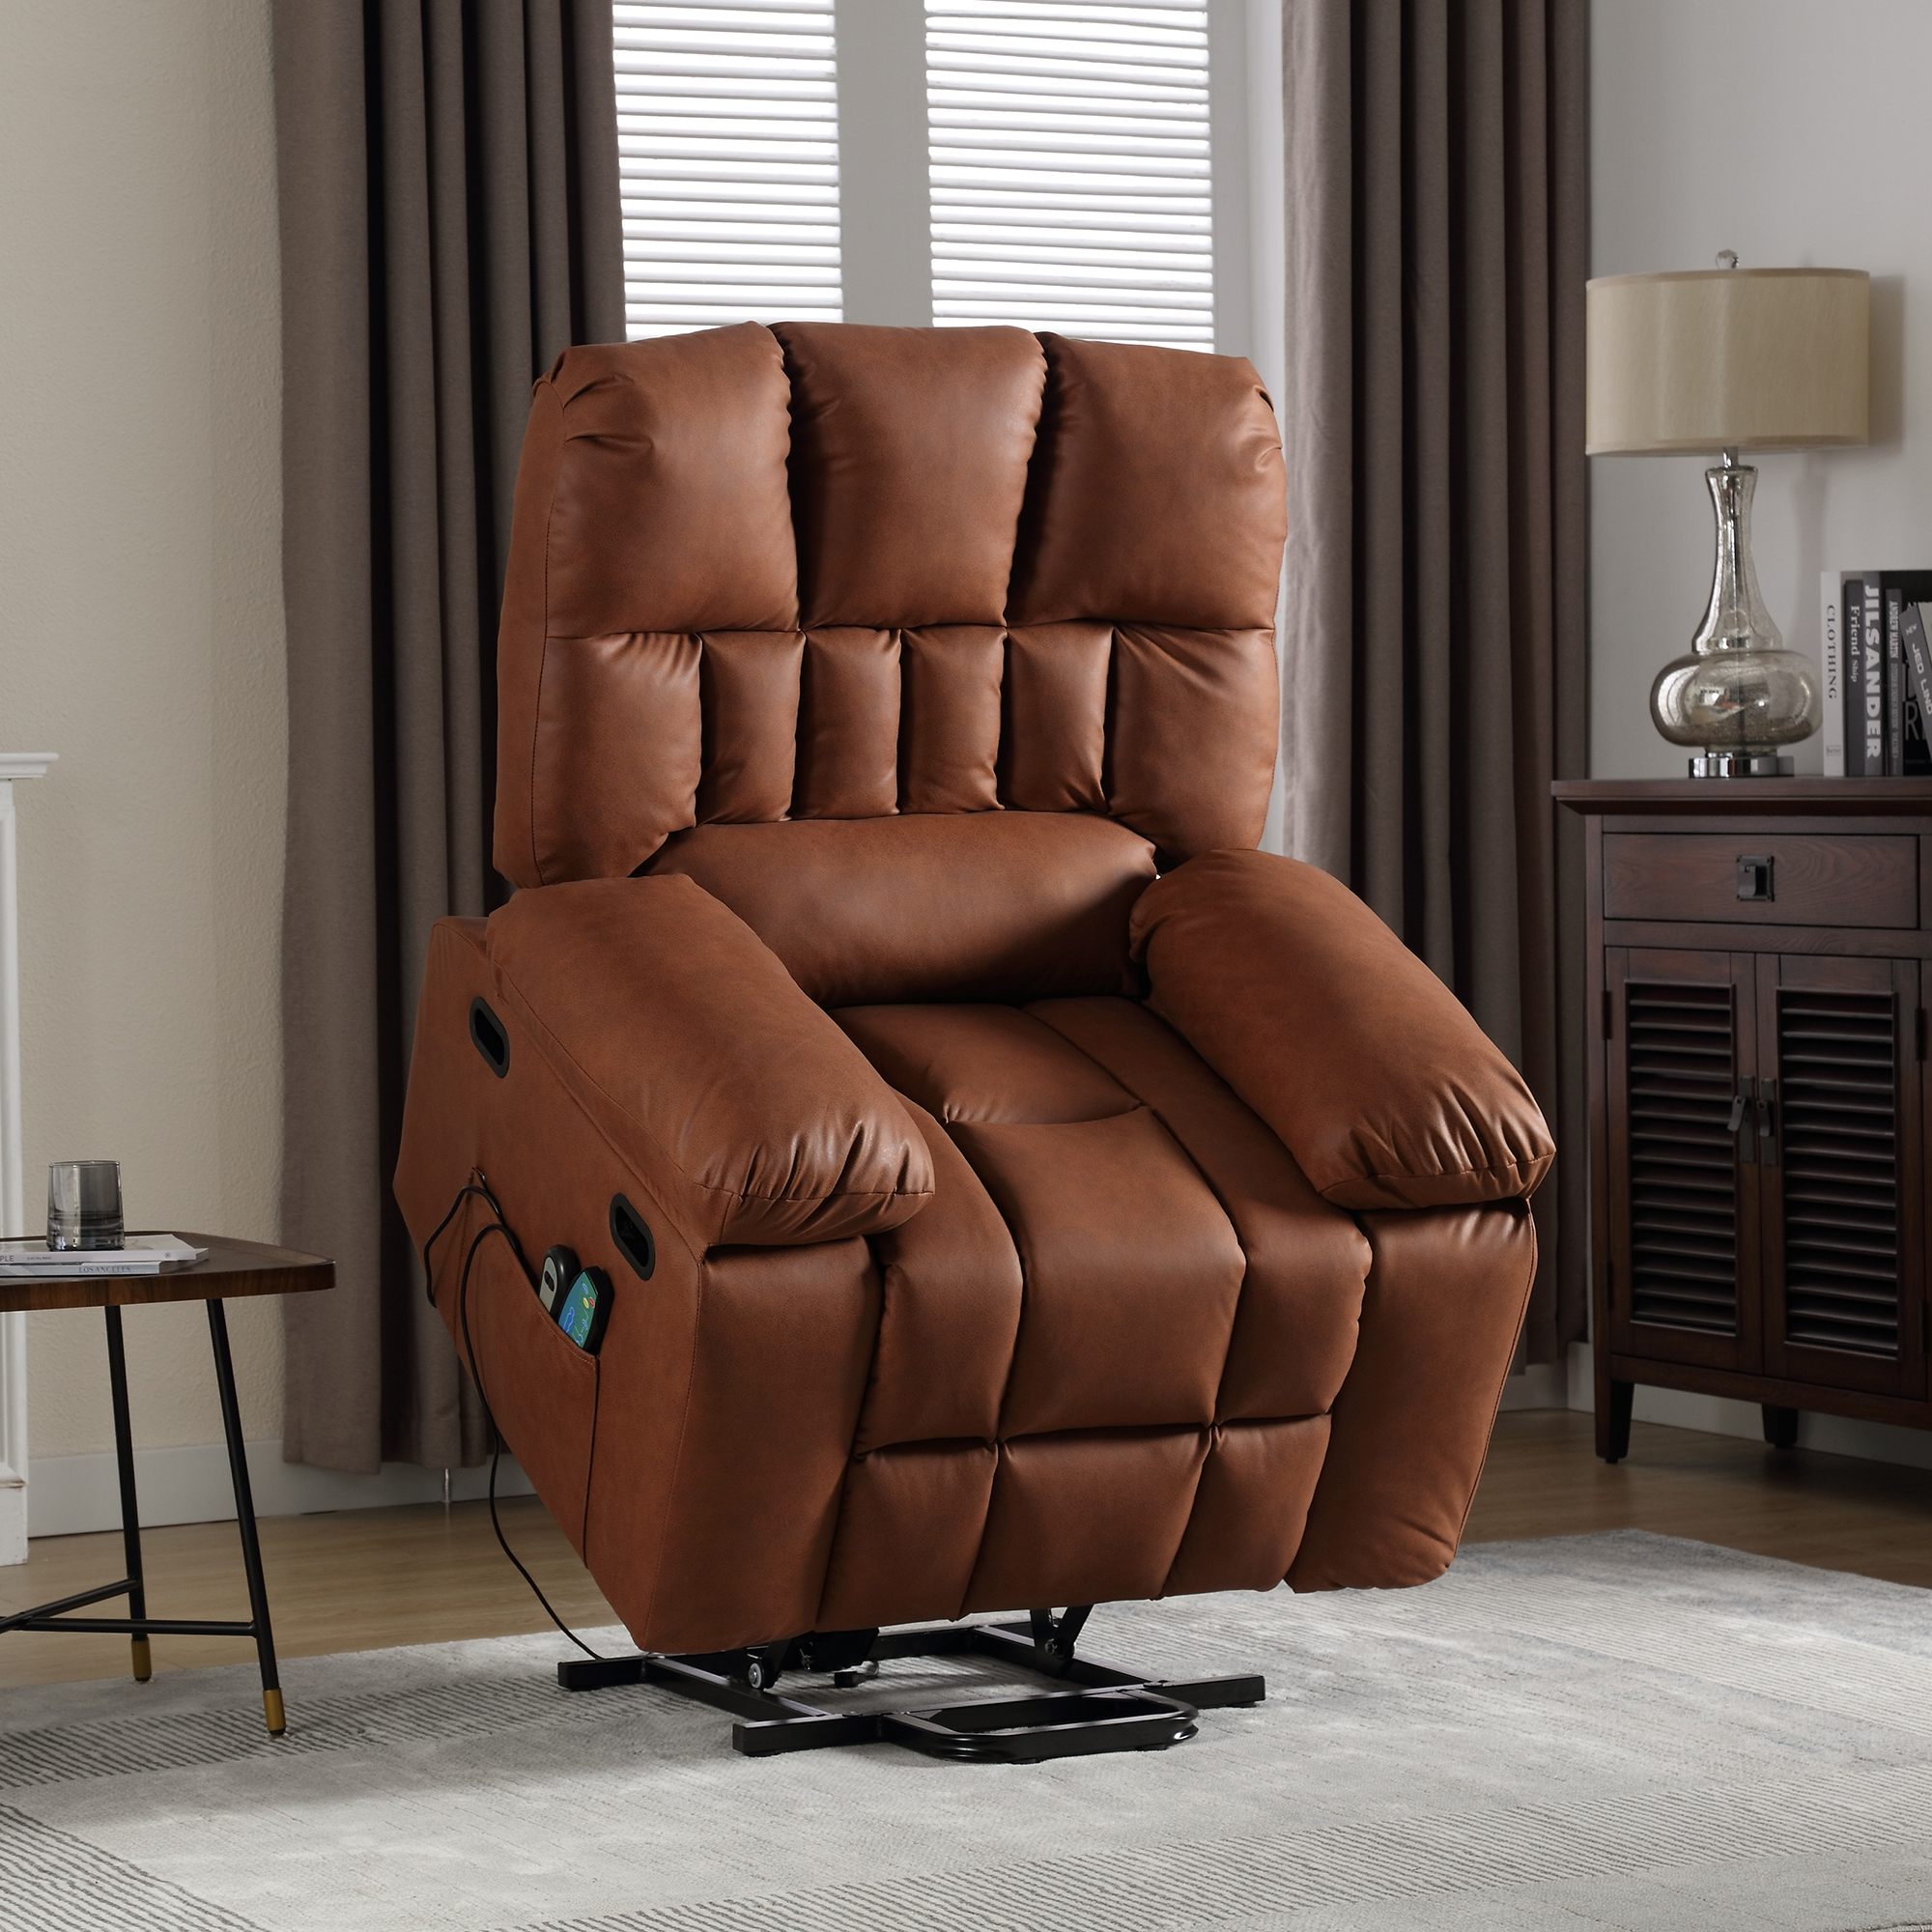 Muumblus Oversize Power Lift Recliner Chair Recliners for Elderly, Heat and Massage, PU Leather Sofa Chair for Living Room Bedroom, Light Brown - image 1 of 9